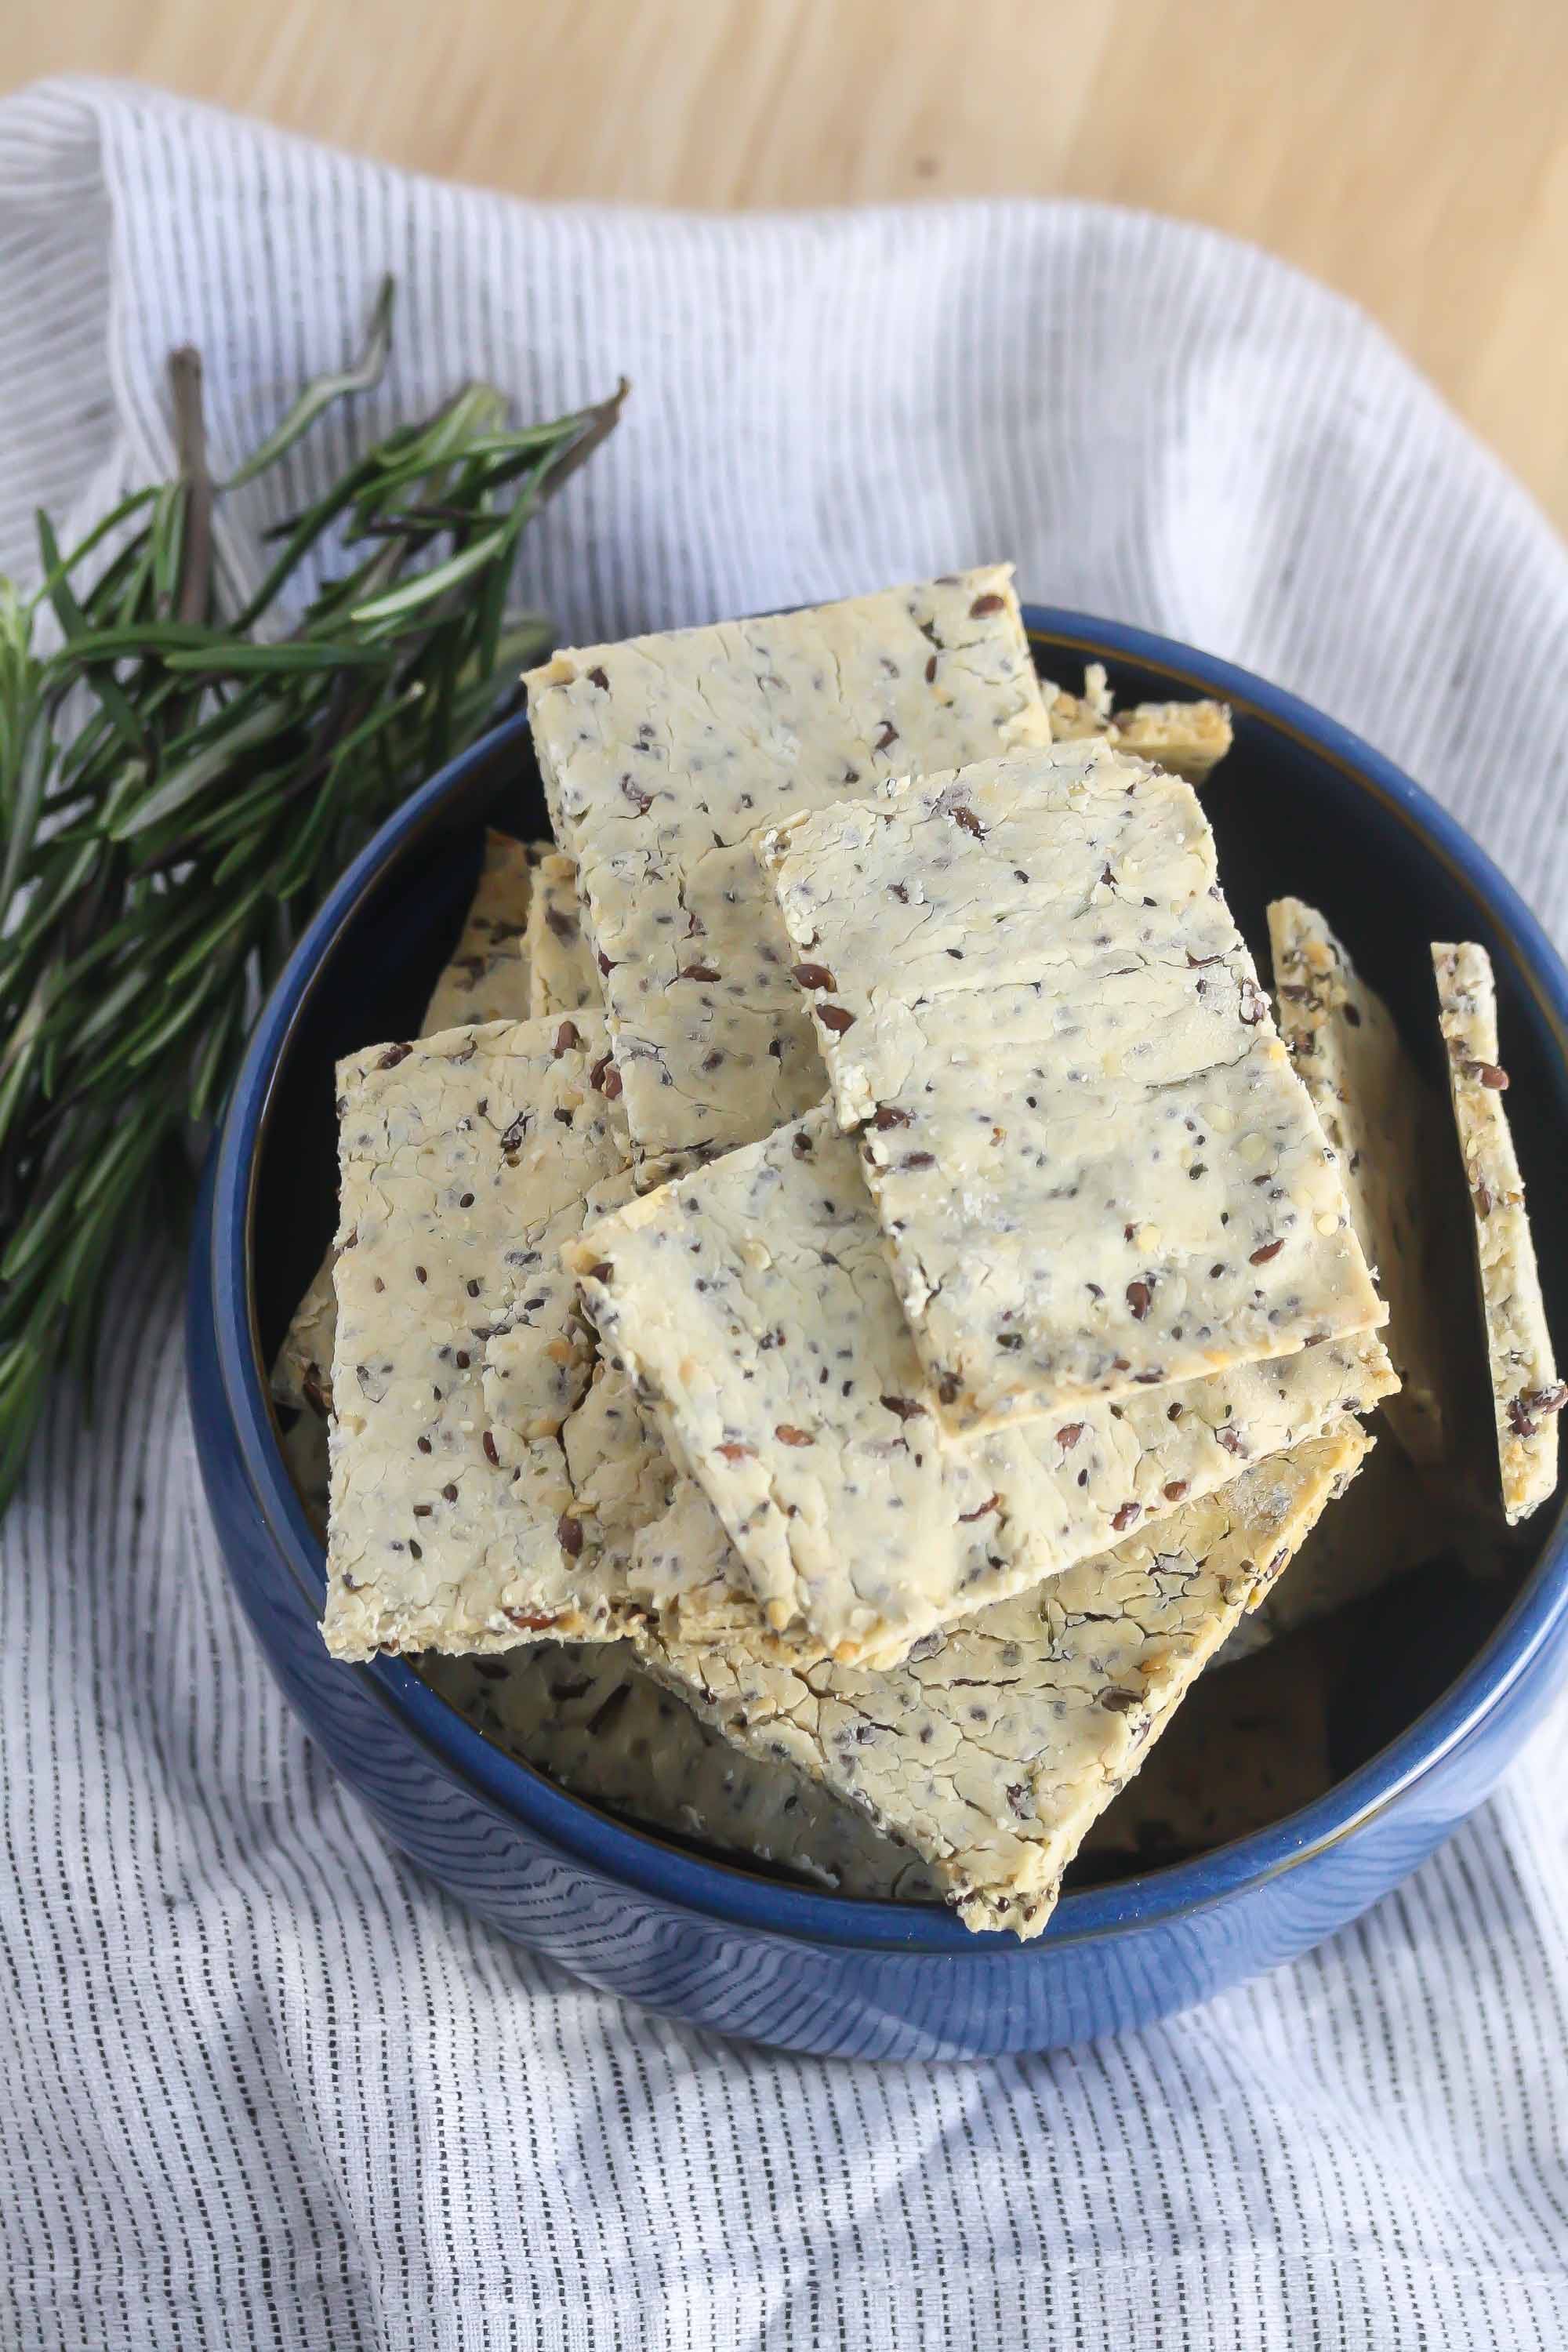 These Gluten-Free Rosemary Super Seed Crackers are healthy and delicious! www.laurenkellynutrition.com